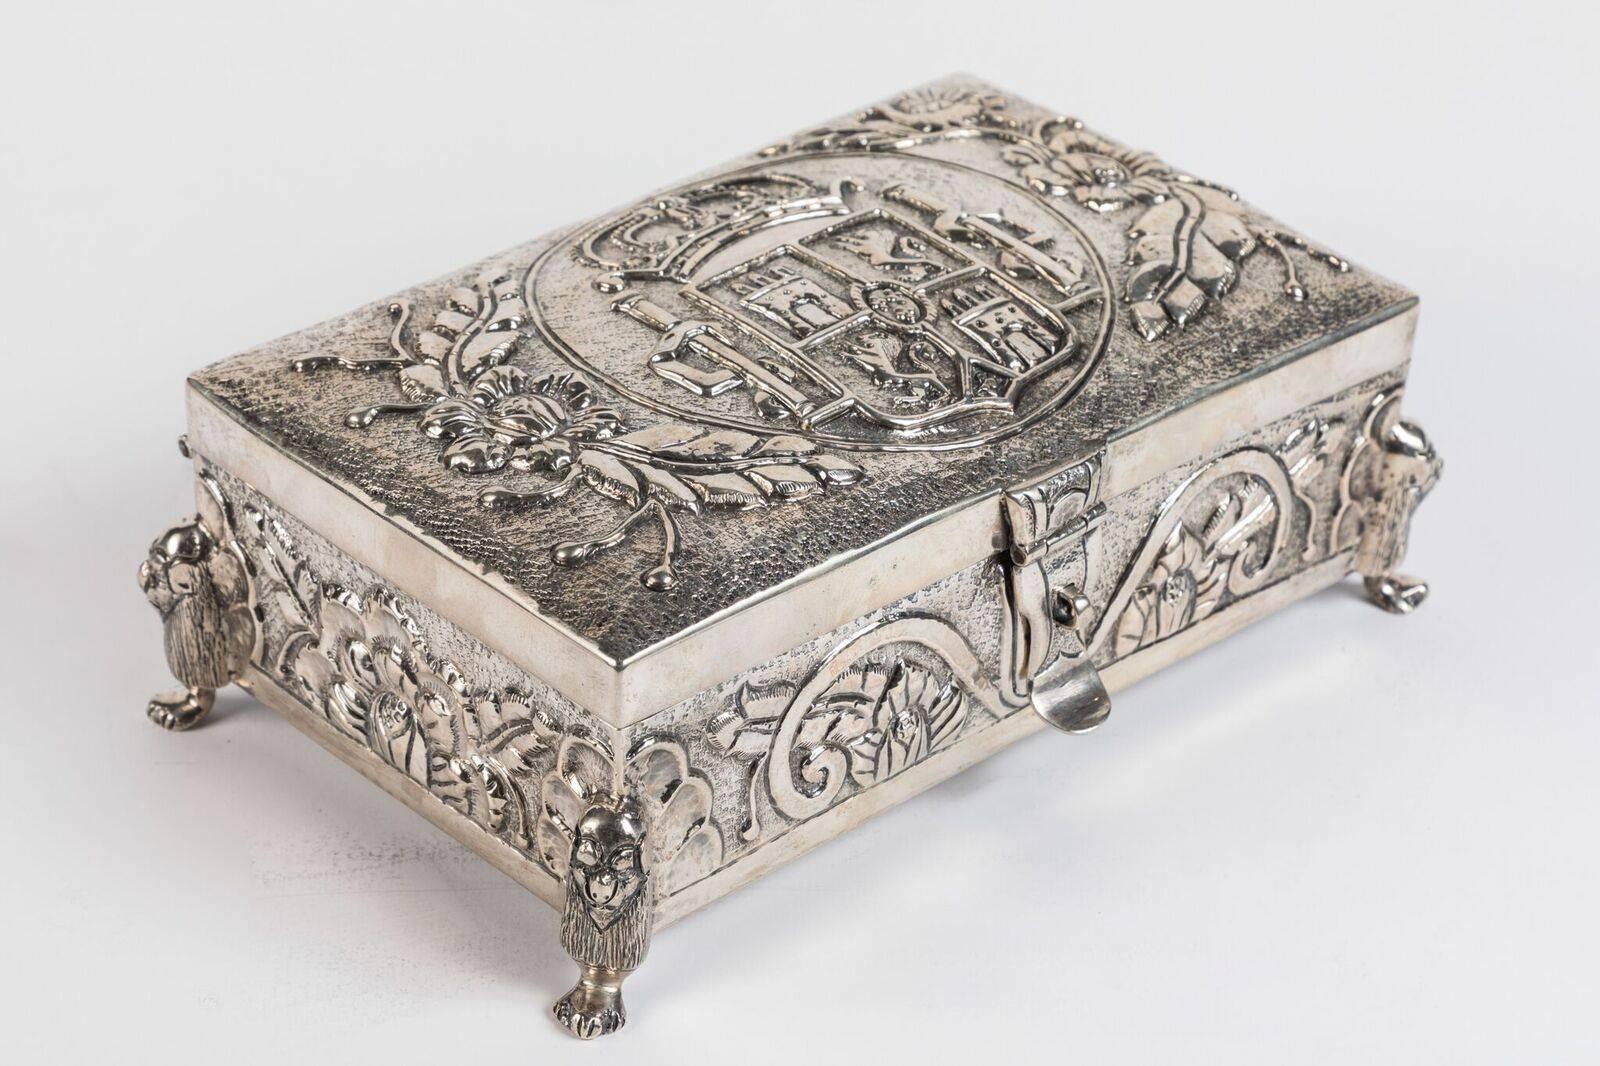 19th Century, Silver Plated Box with Royal Crest For Sale at 1stDibs